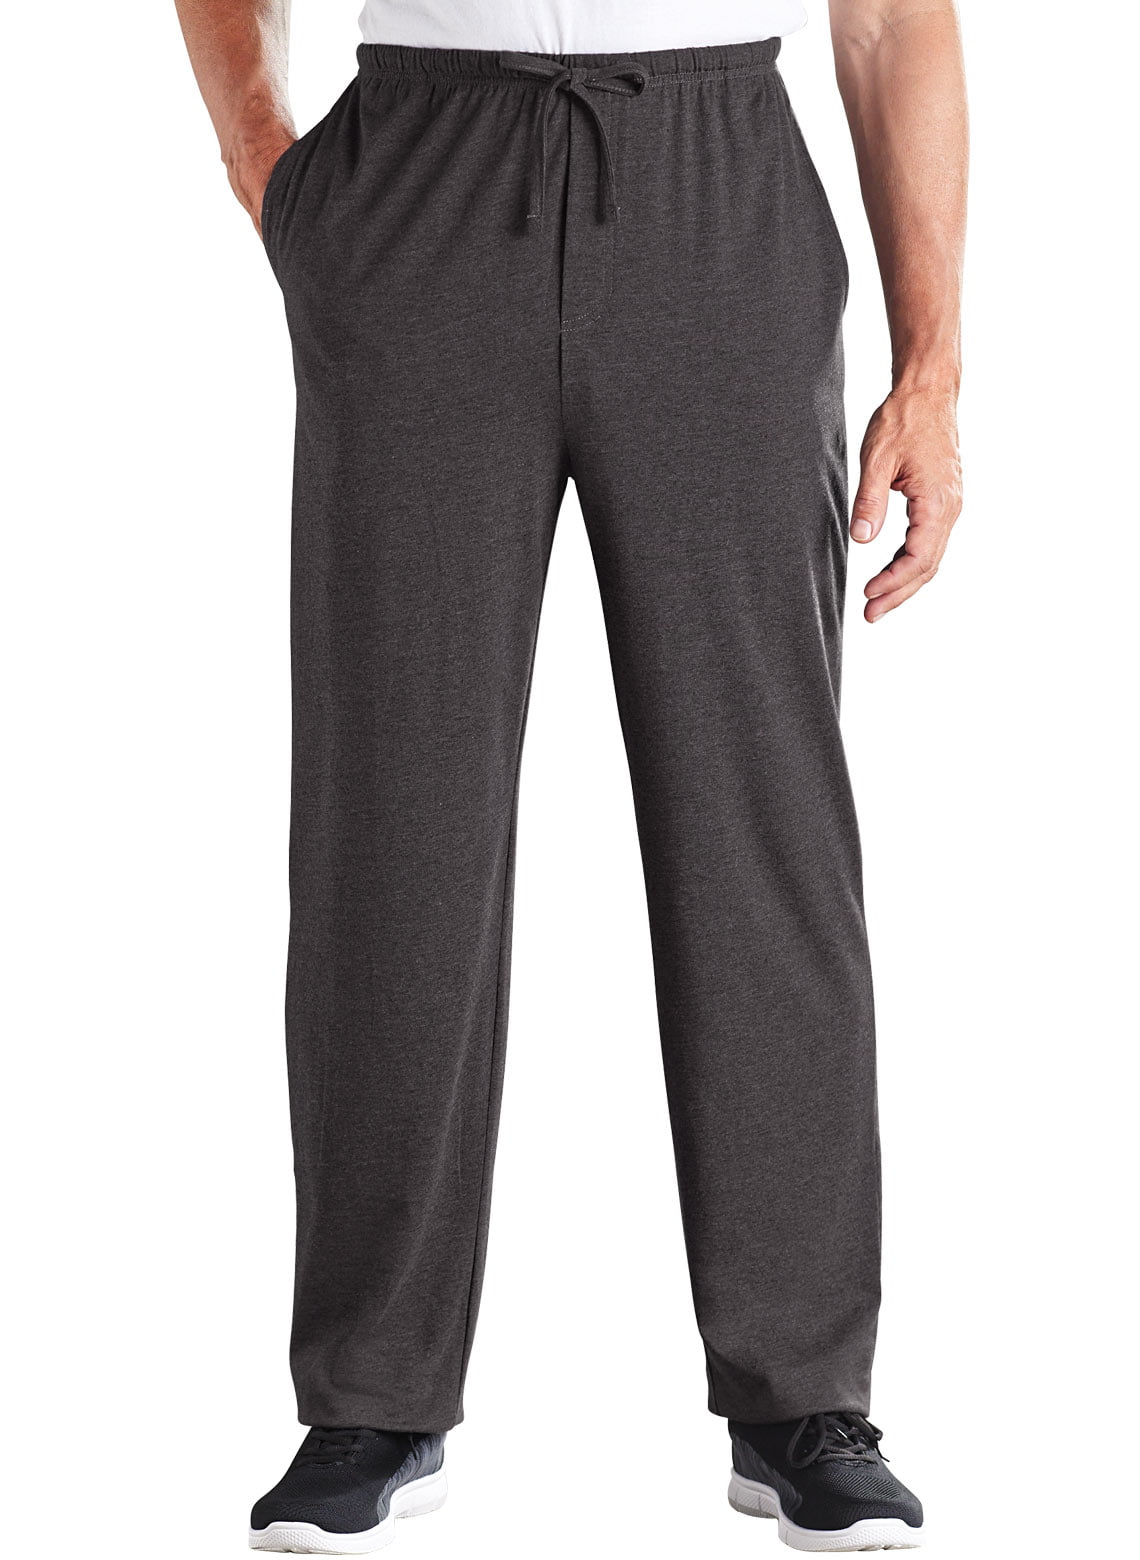 Men's Comfy Lounge Pant by Freedom Fit Zone - Walmart.com